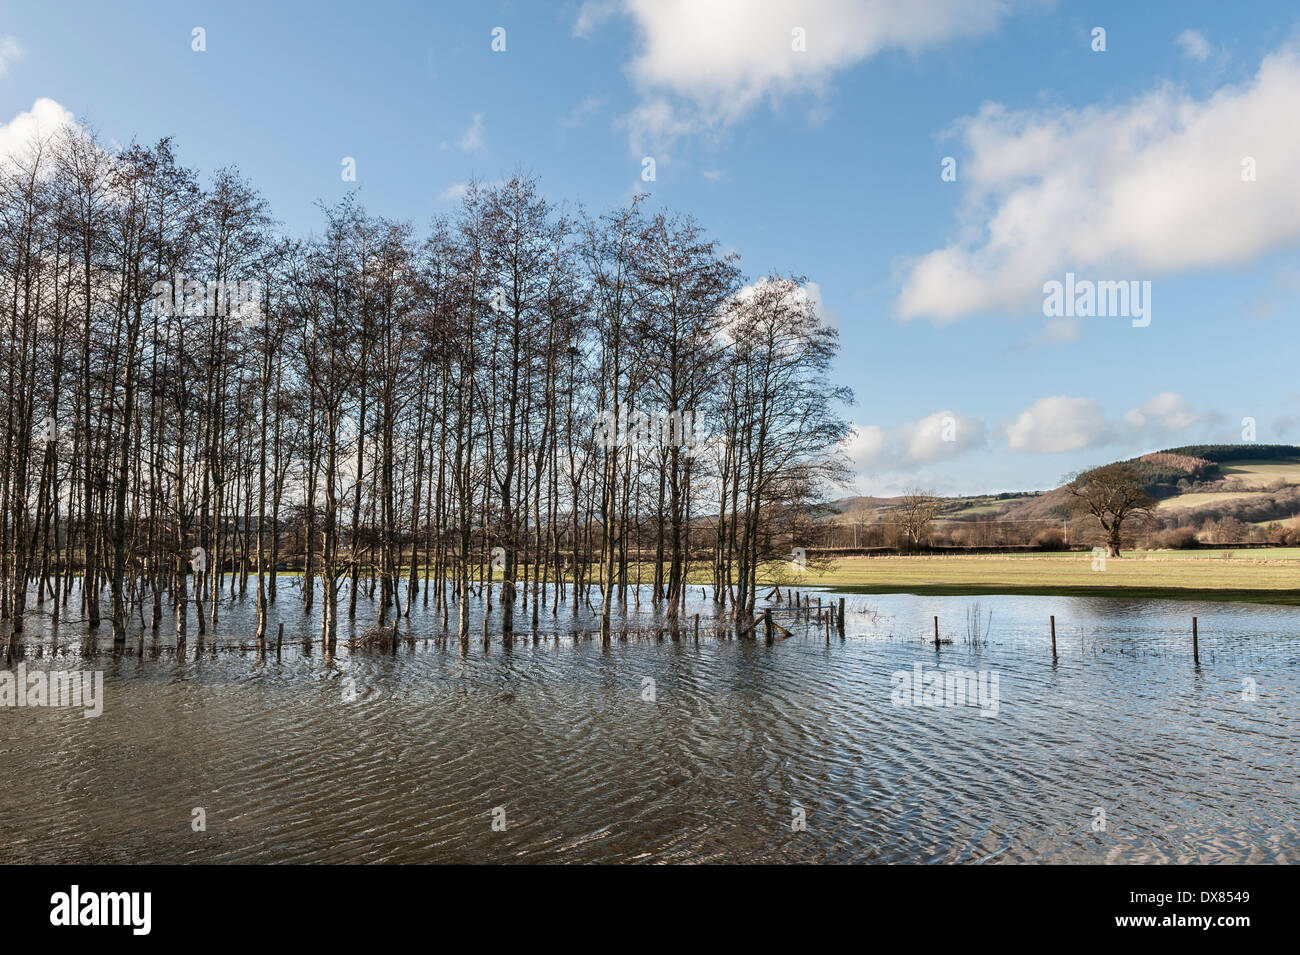 A copse of silver birch trees standing in a flooded field in Herefordshire, UK Stock Photo